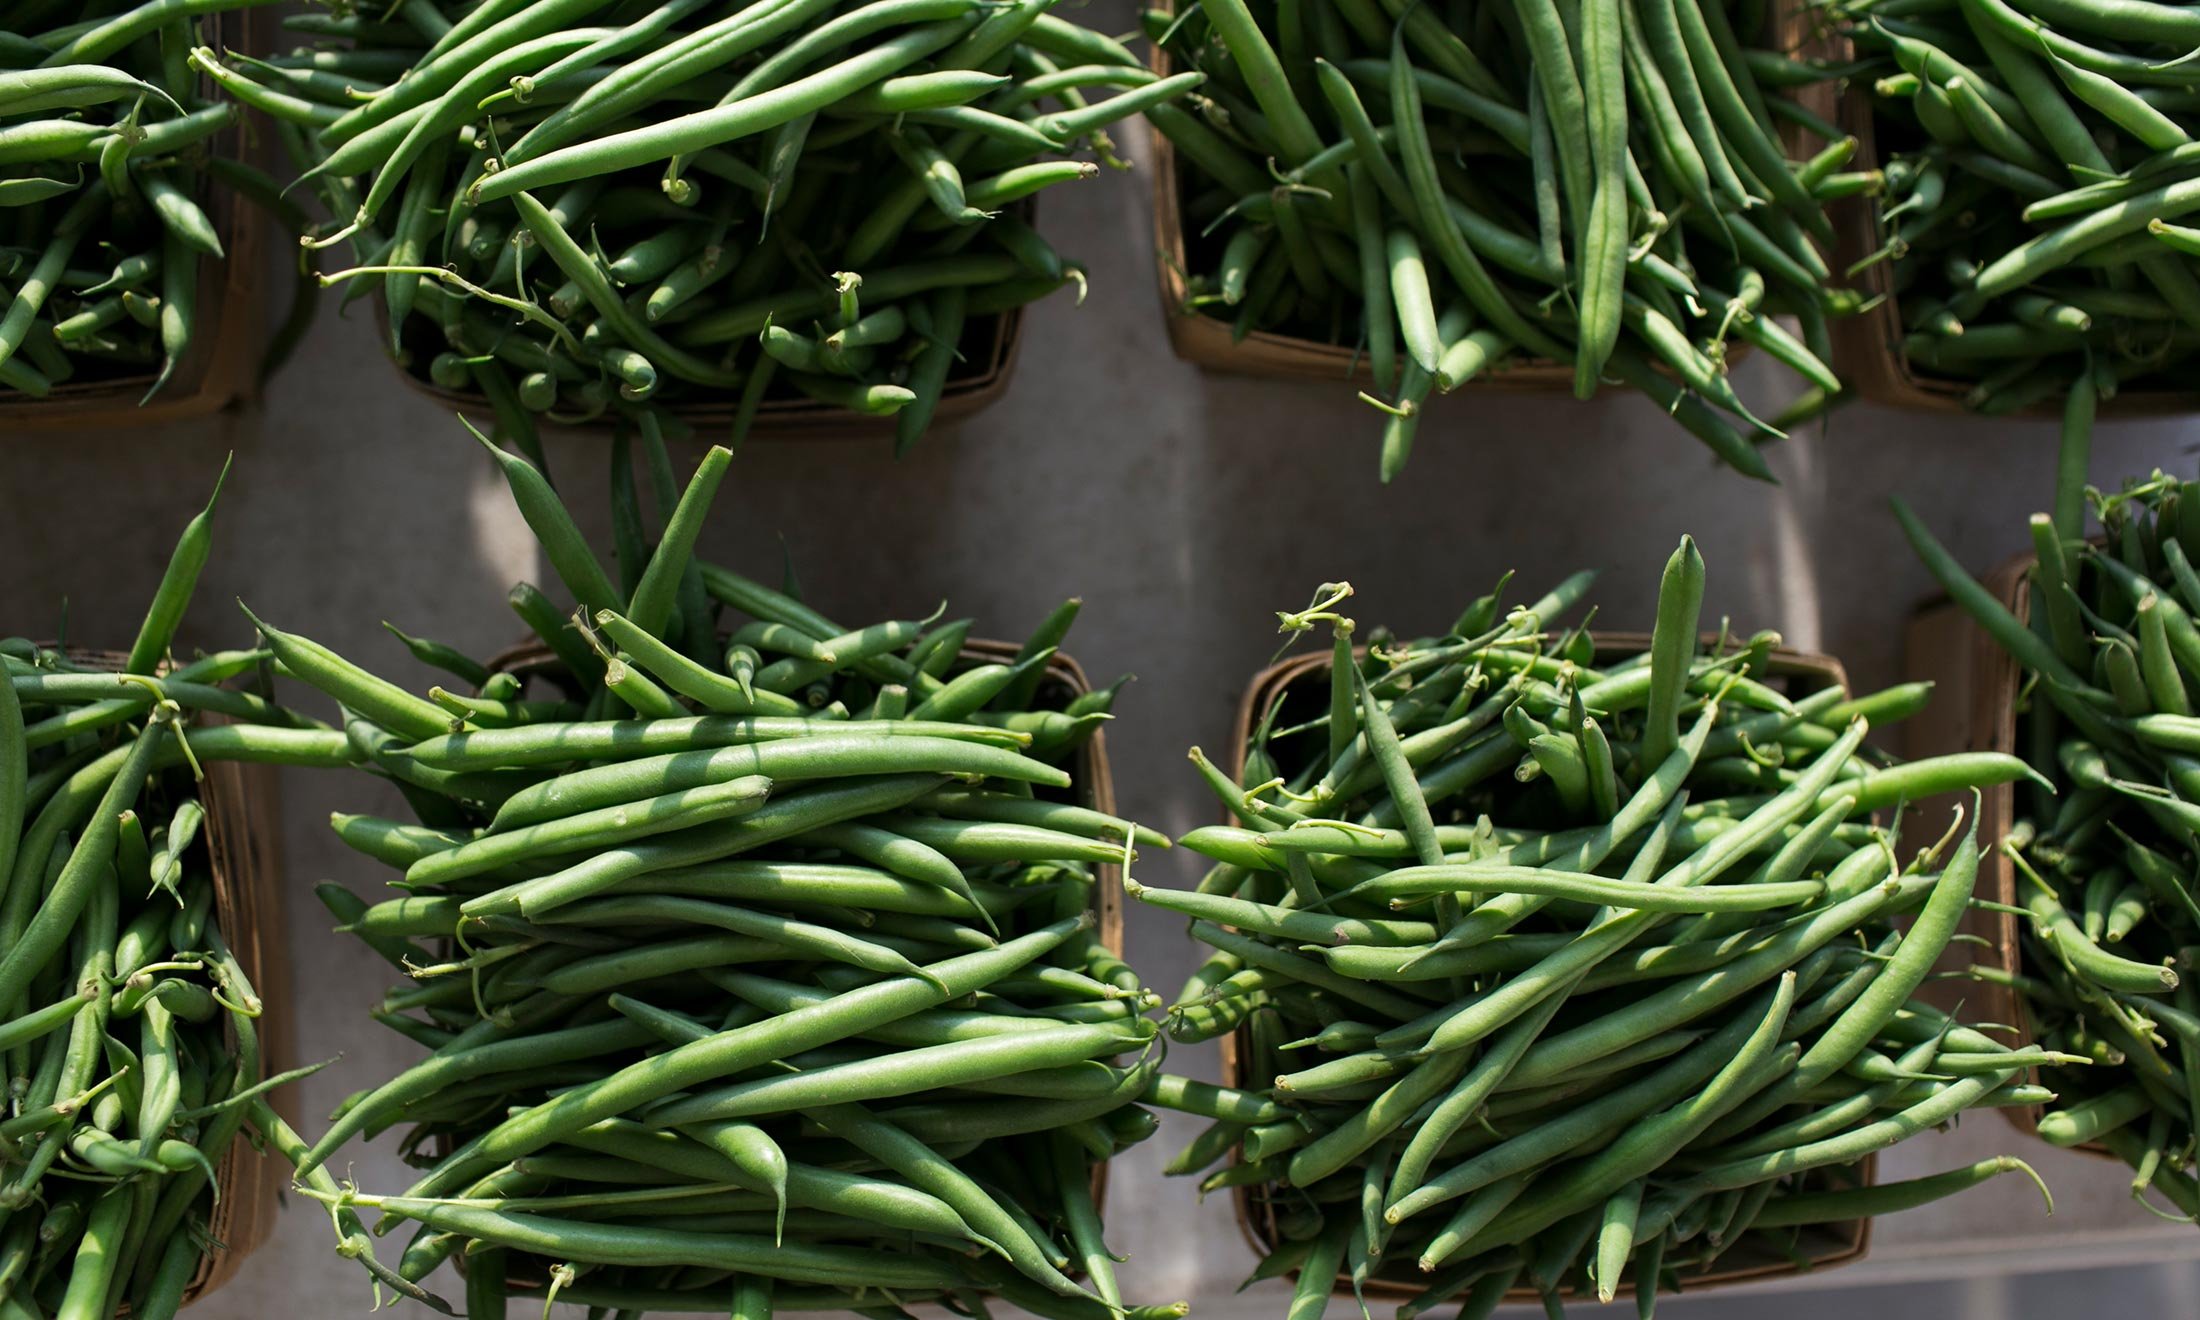 Freshly picked string beans at the Royal Oak Farmers Market